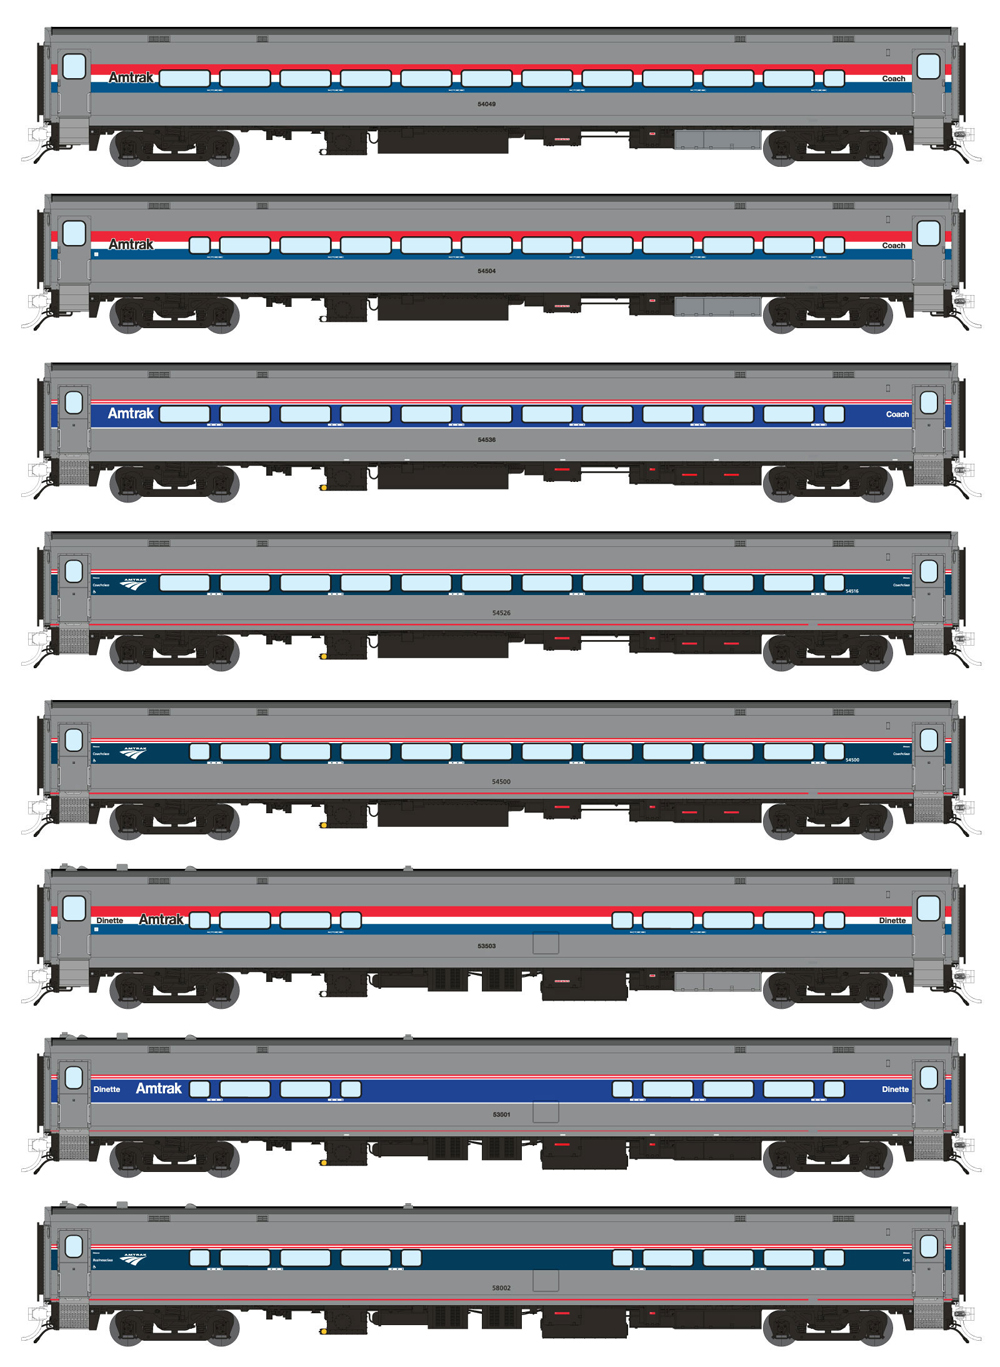 Illustration showing side views of eight HO scale Amtrak Horizon cars.